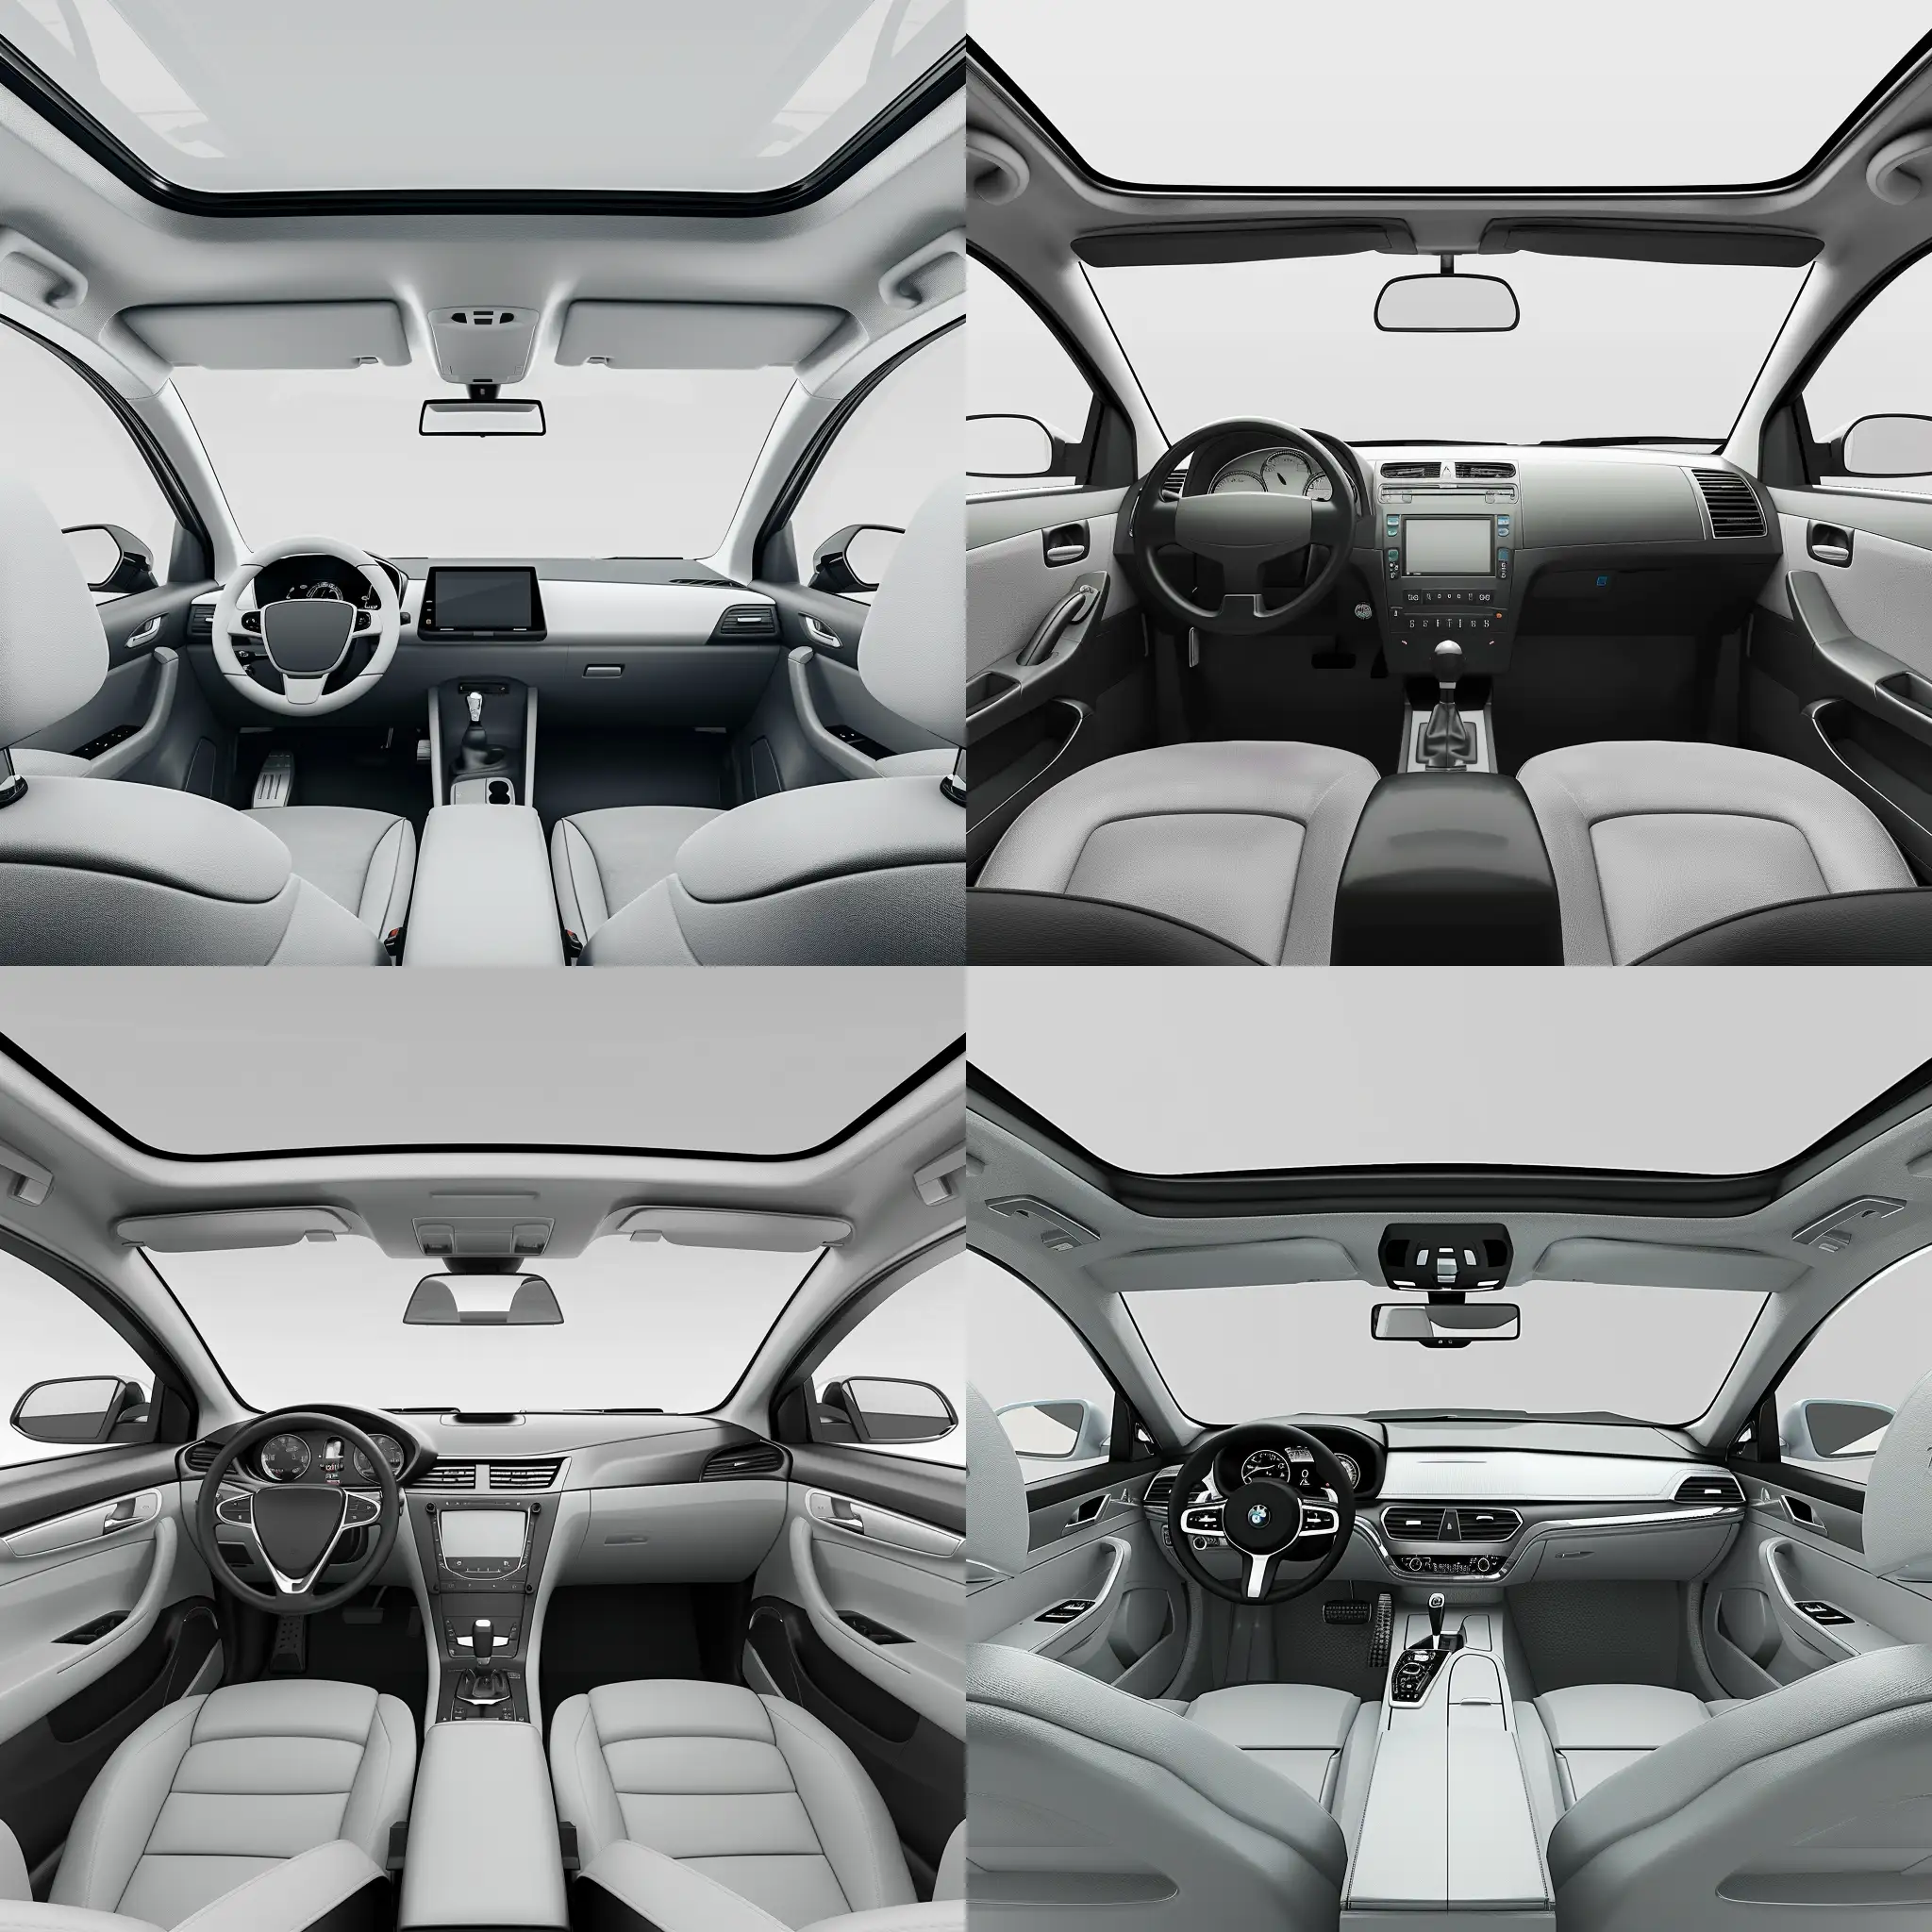 Realistic-Car-Interior-Accessories-on-WhiteGray-Background